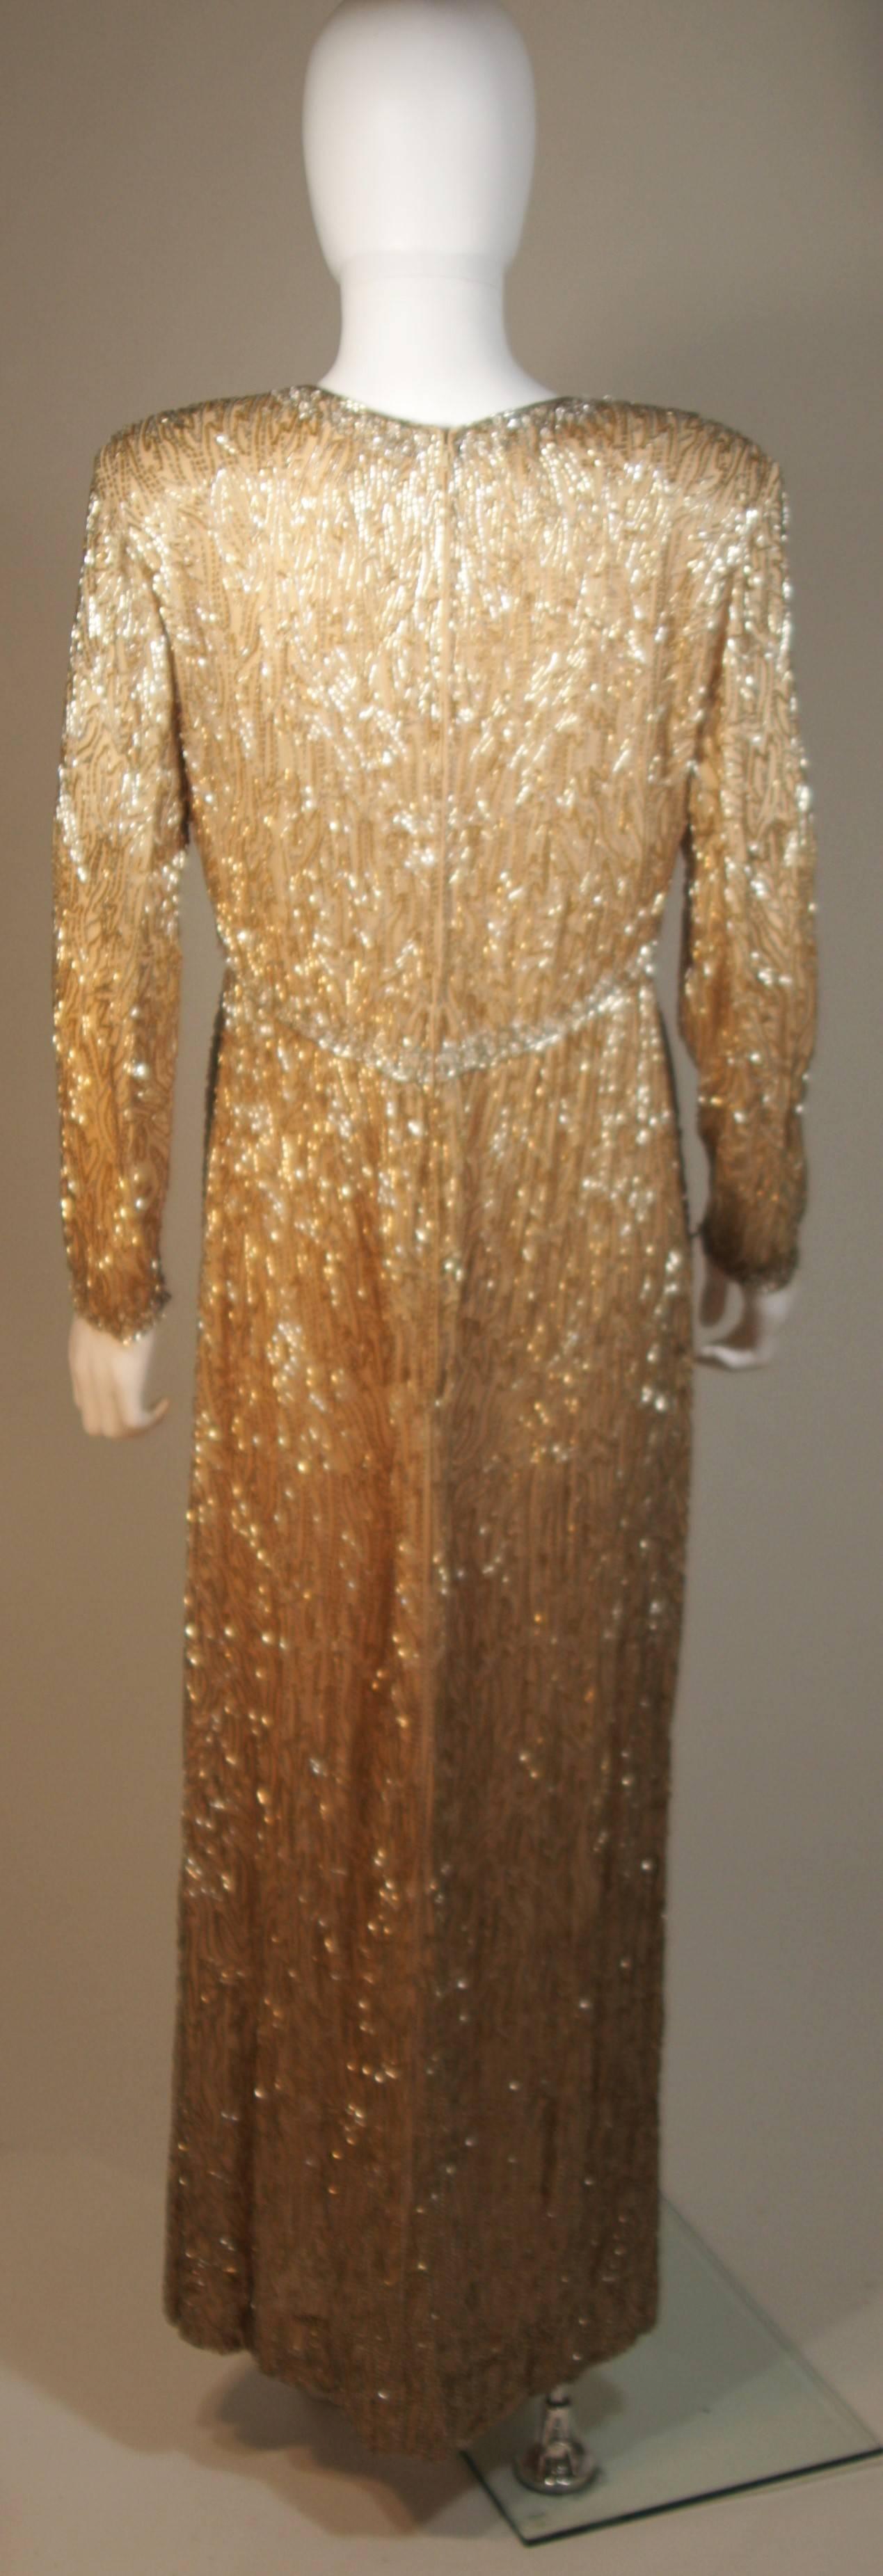 VICTORIA ROYAL Champagne Beaded Gown Size Large For Sale 4